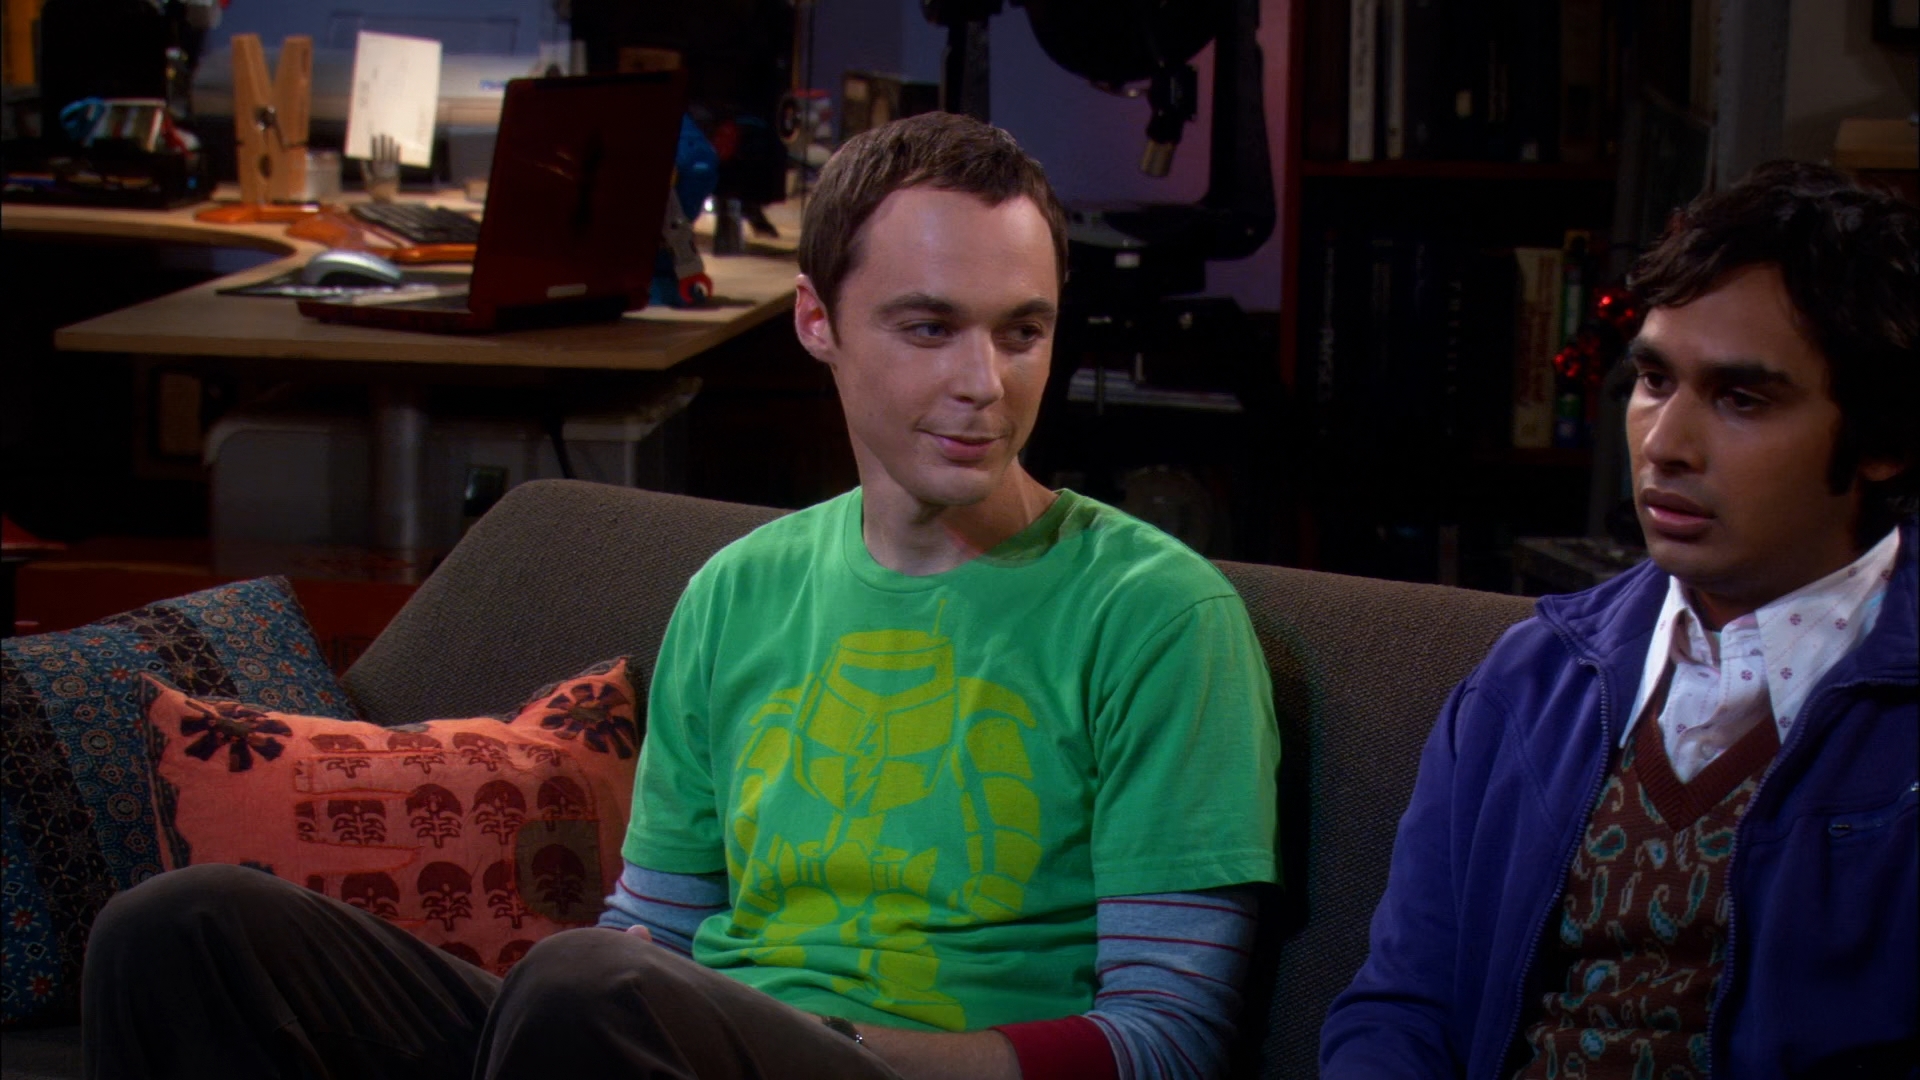 big bang theory with extras download torrent